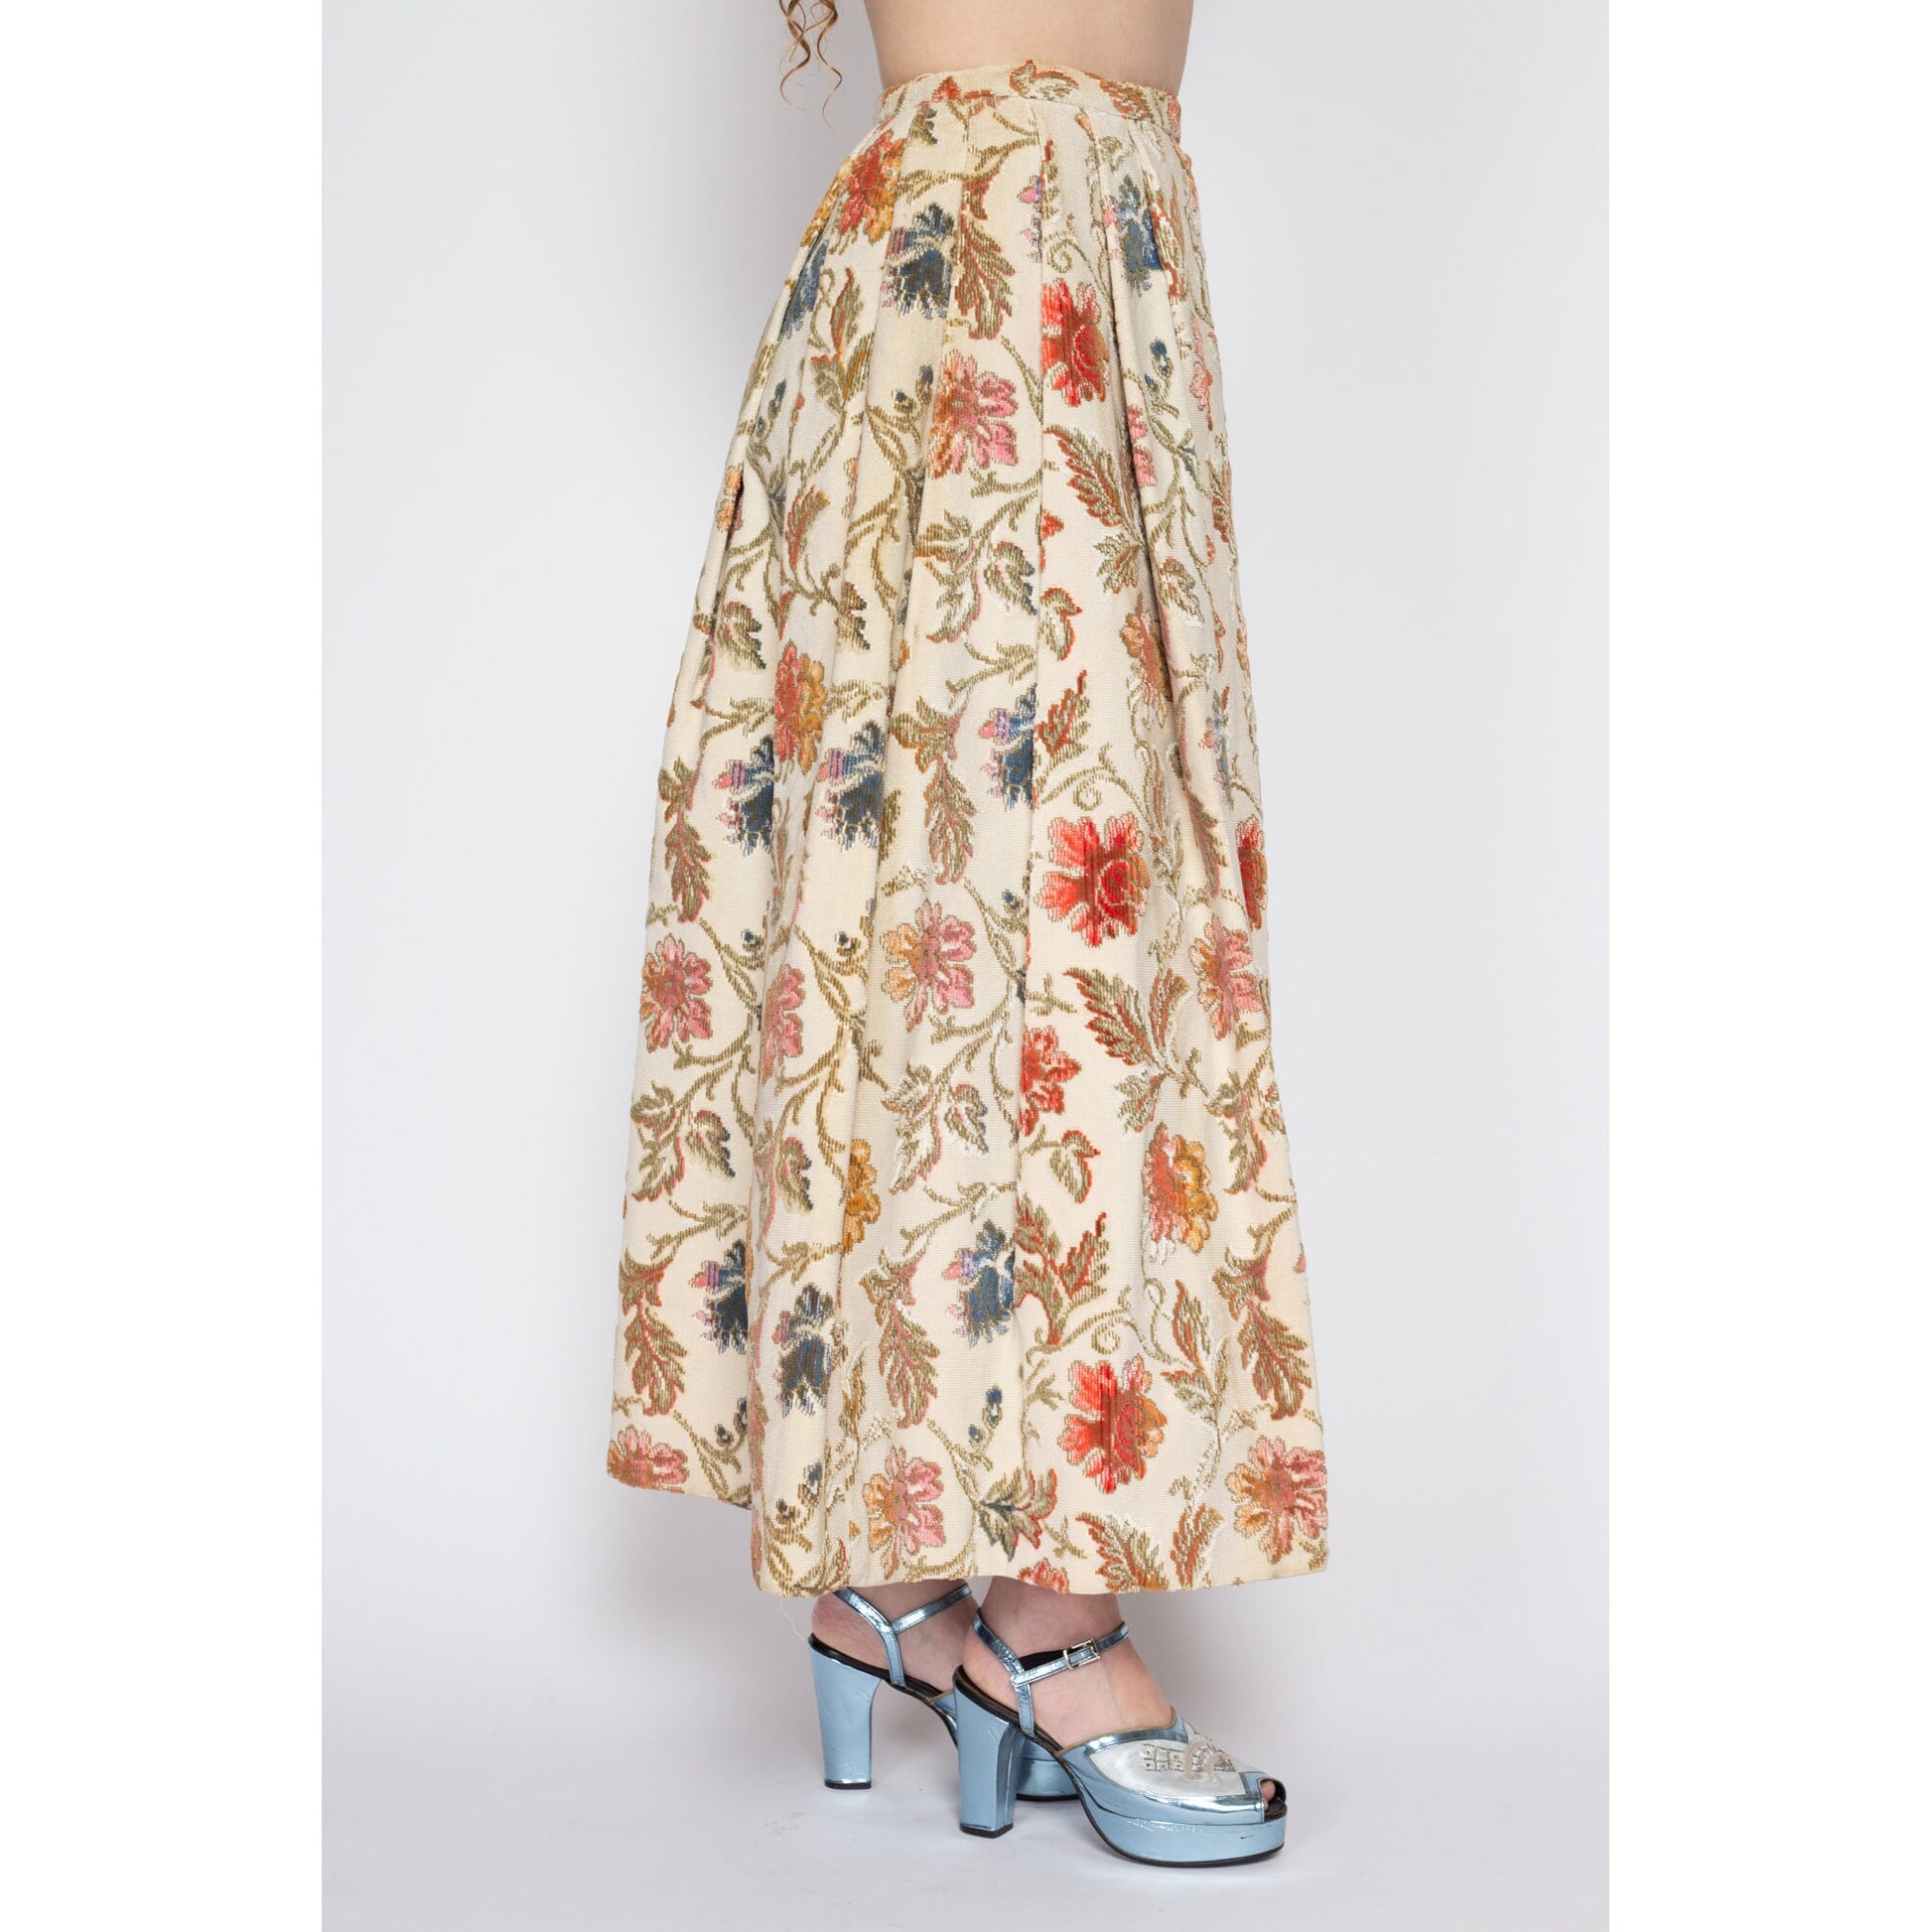 Small 1960s Floral Tapestry Maxi Skirt NWT | Vintage 60s Mr. Gee Melba Hobson High Waisted A Line Carpet Skirt